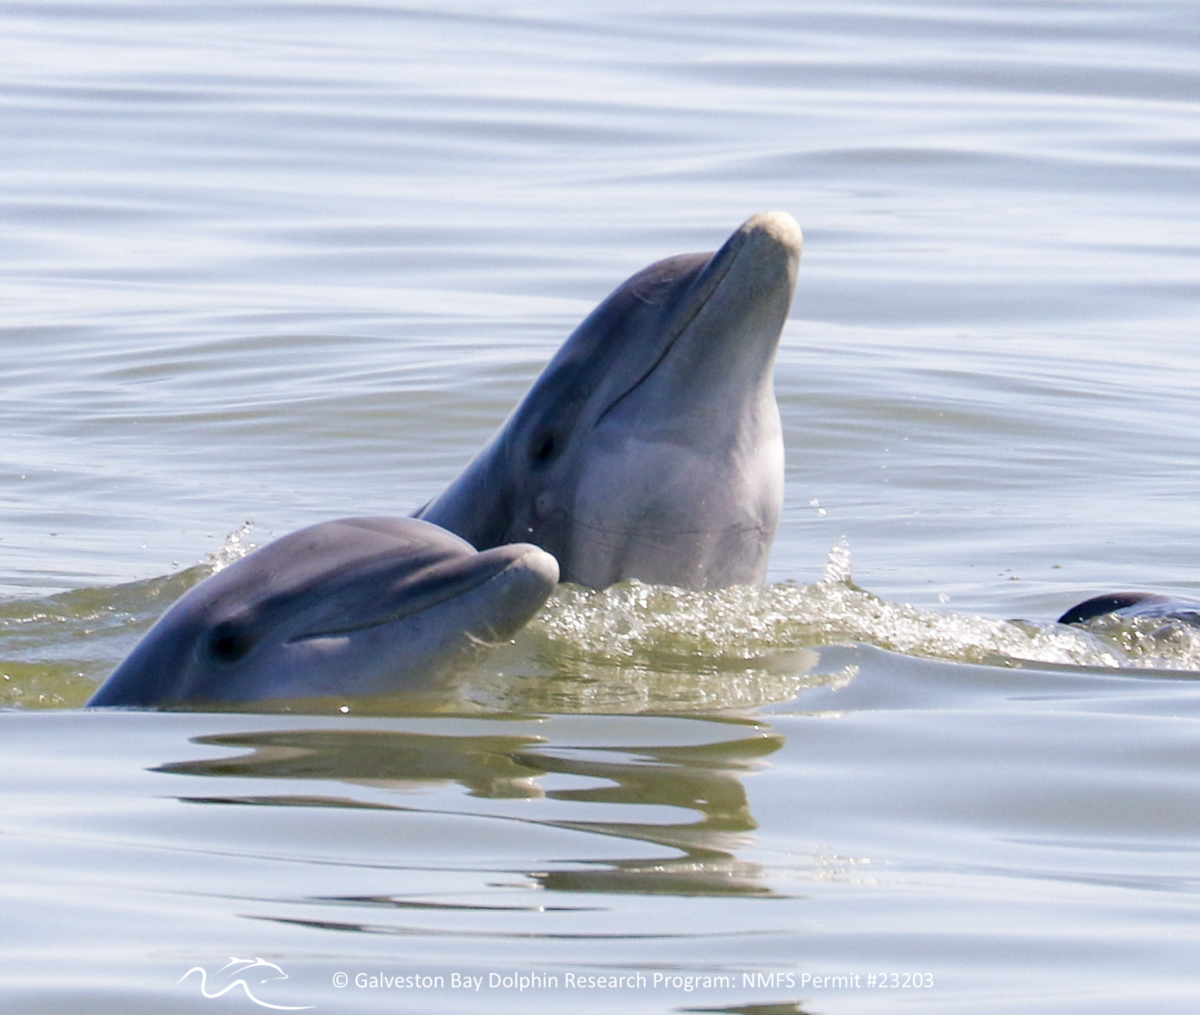 Two dolphins poke their heads above water.